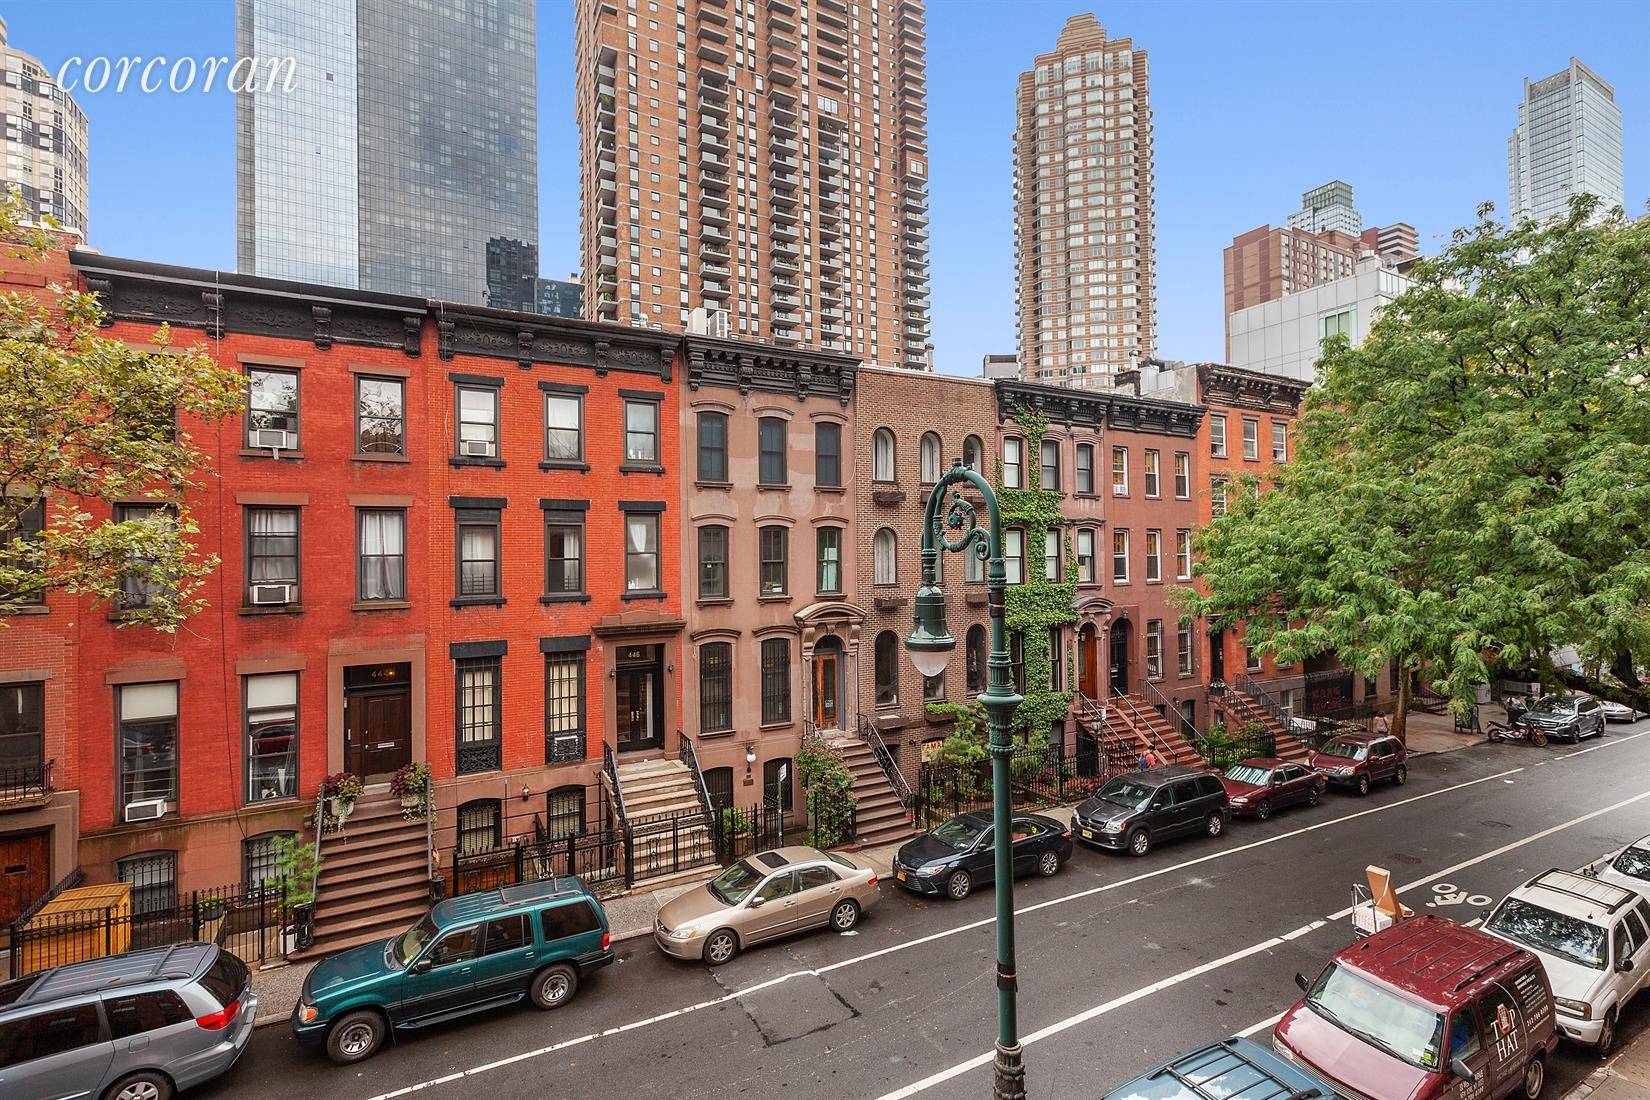 443 West 44th Street between 9th and 10th Avenues MINT Renovated Townhouse on Picturesque Tree lined Street.